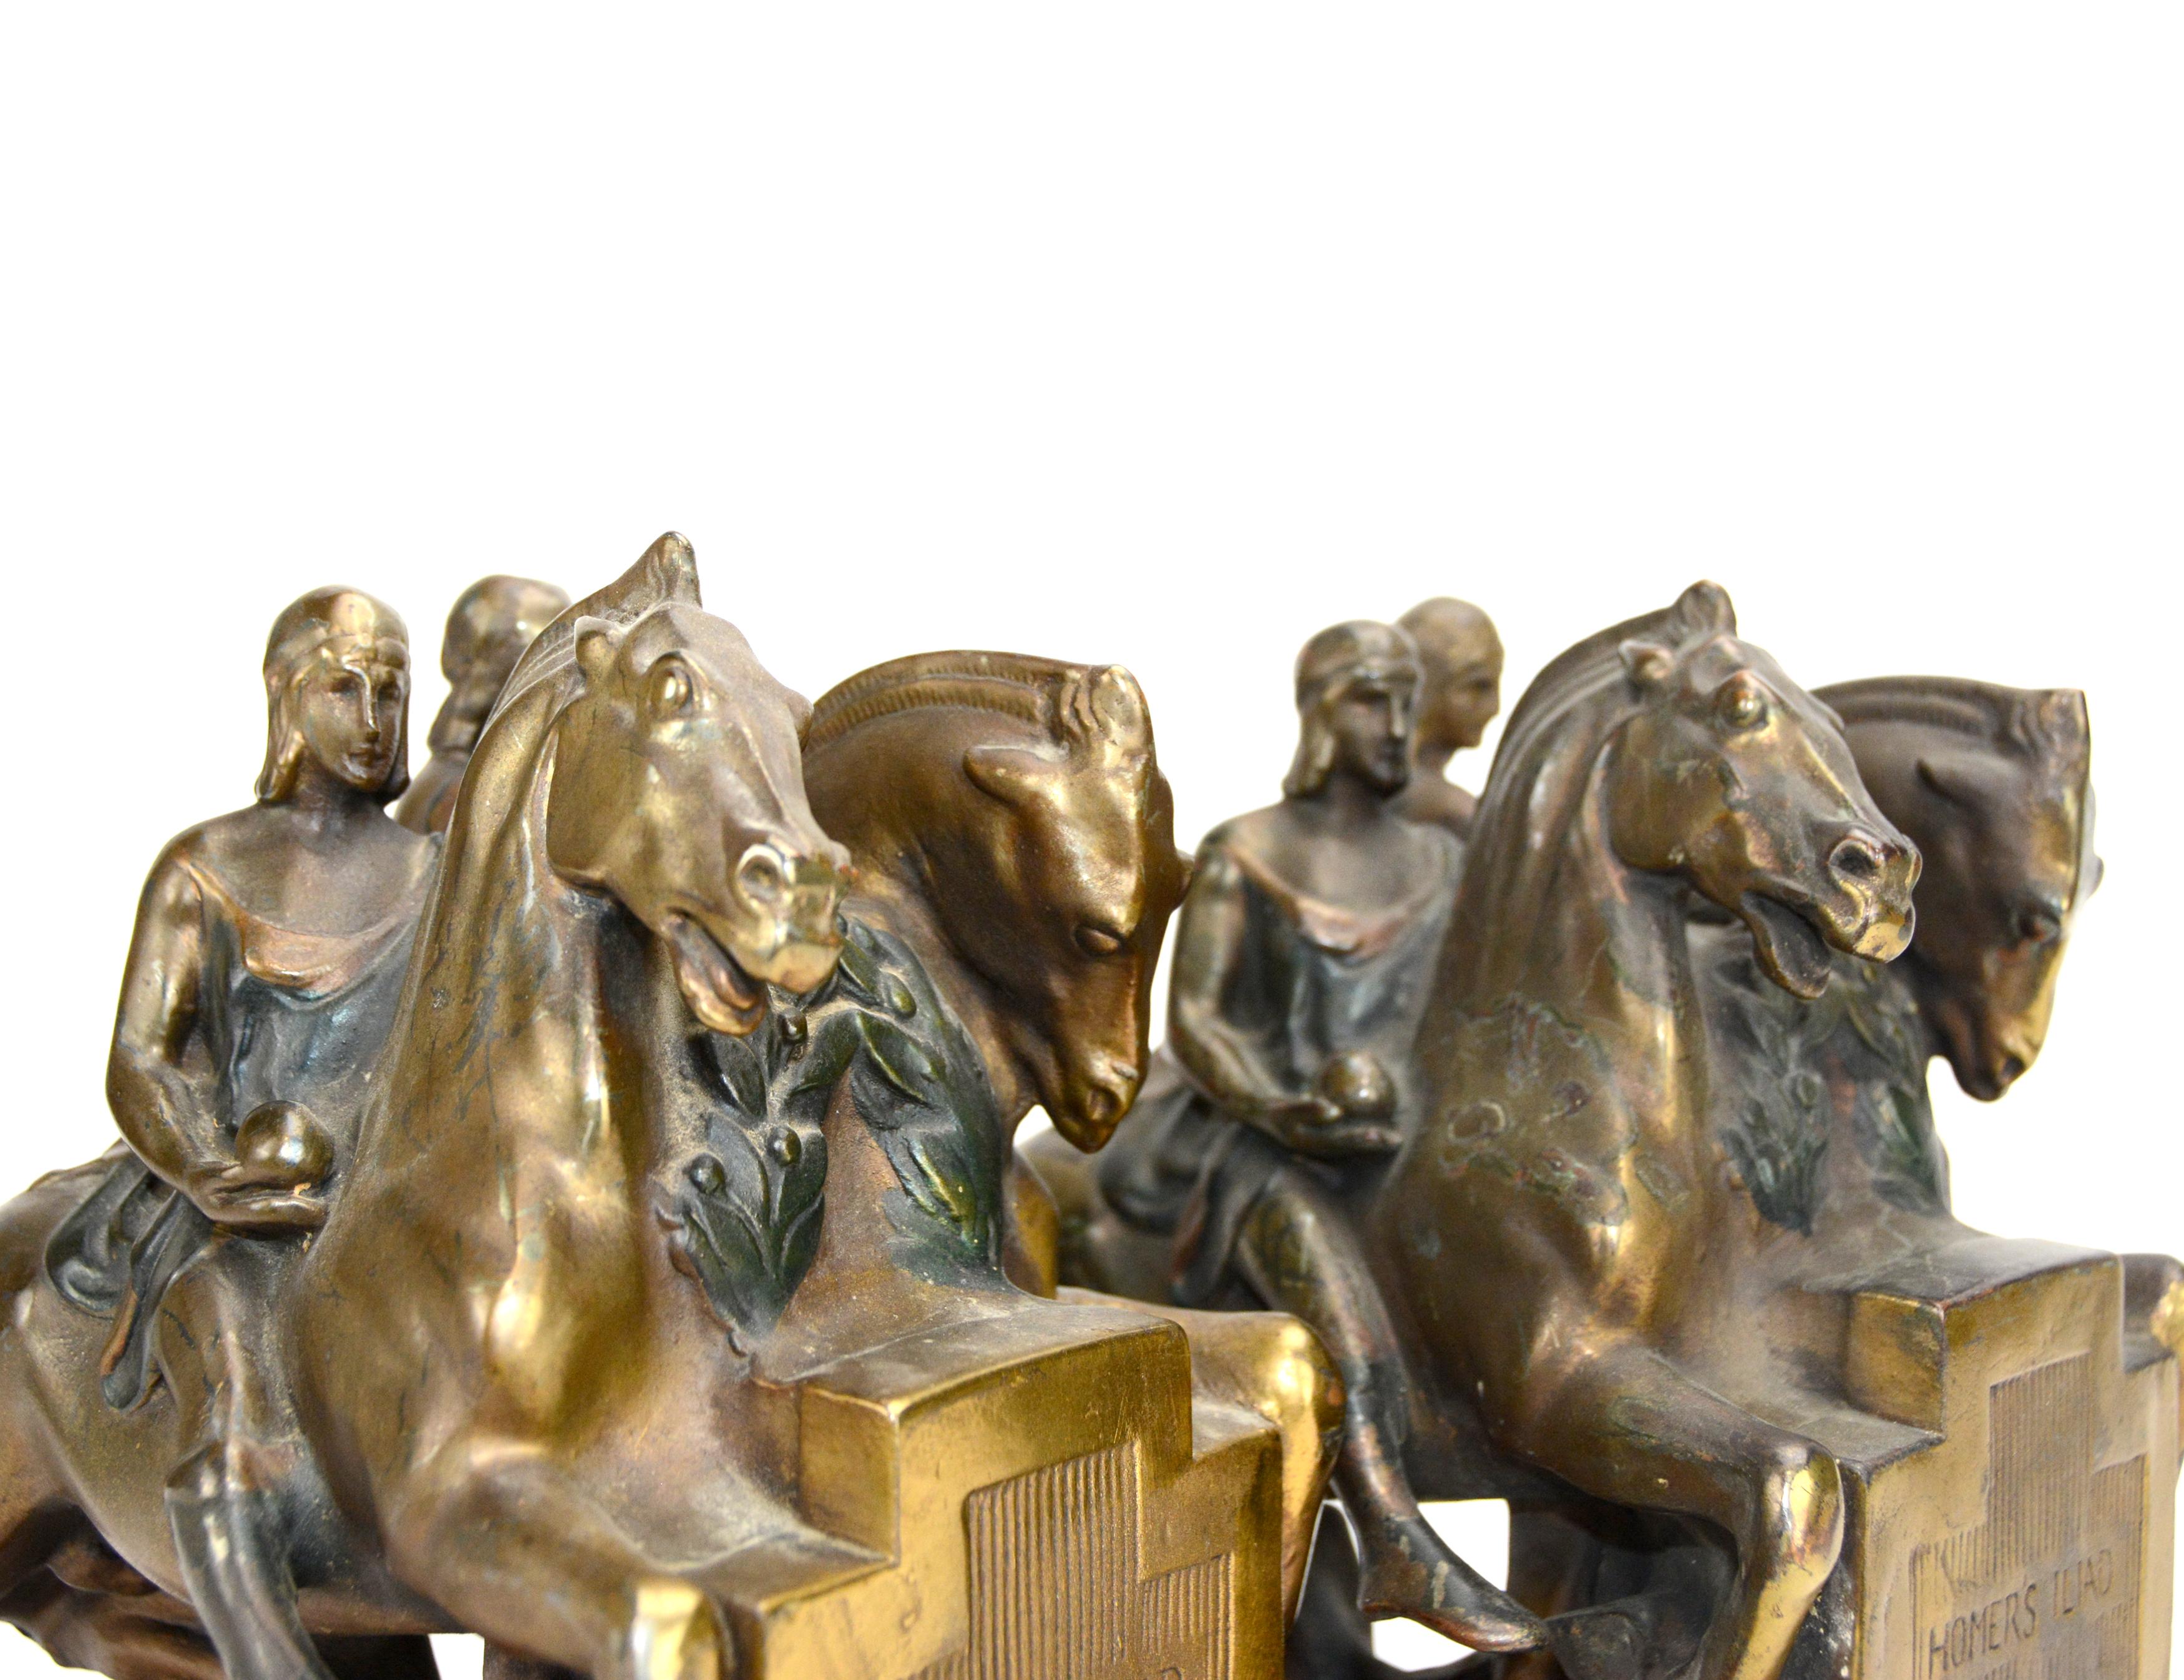 1924 Pair of Homer's Iliad Horseman Pompeian Bronze Bookends with Original Color For Sale 4